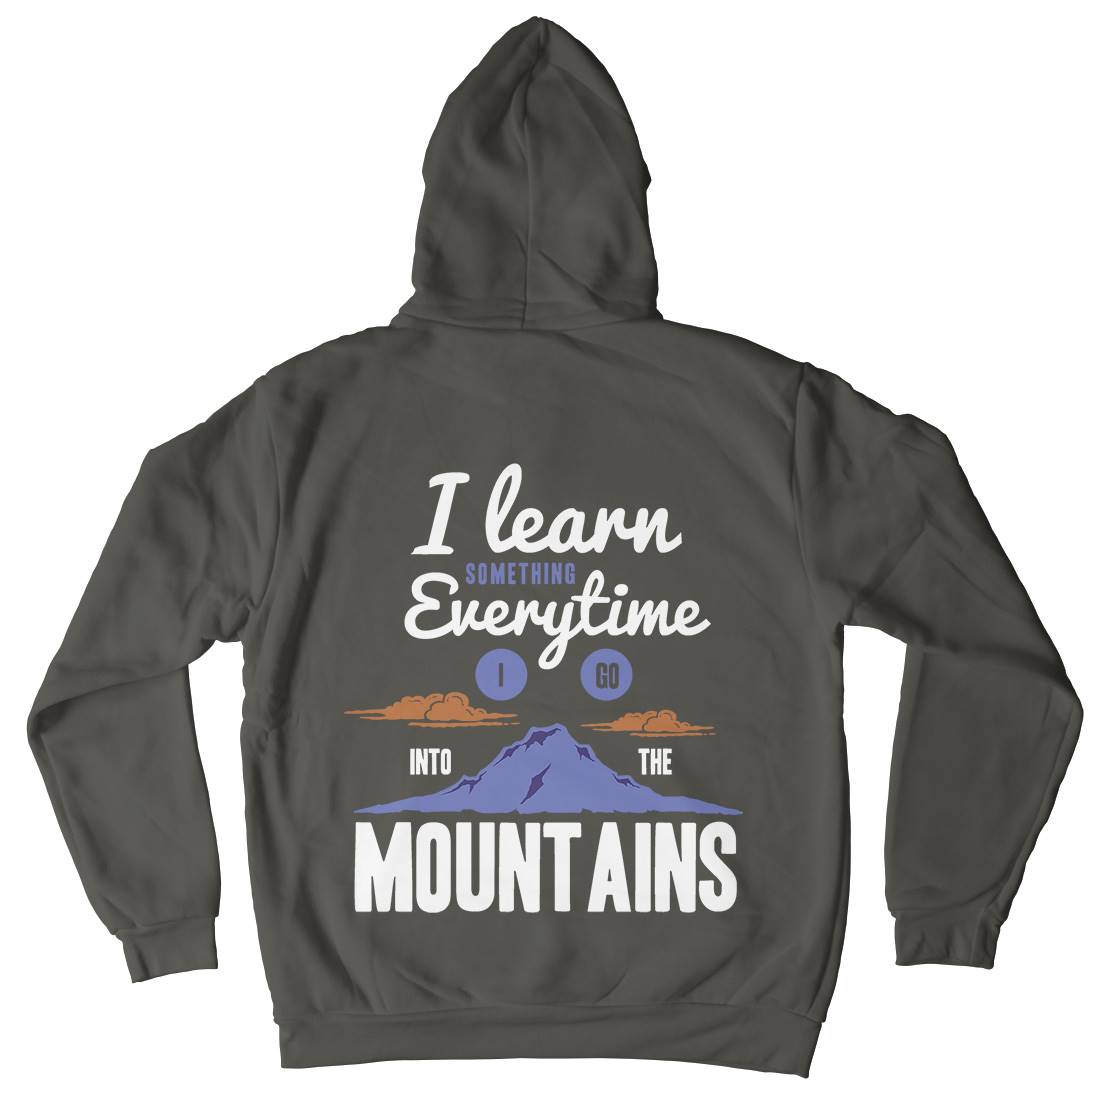 Learn From The Mountains Kids Crew Neck Hoodie Nature A335